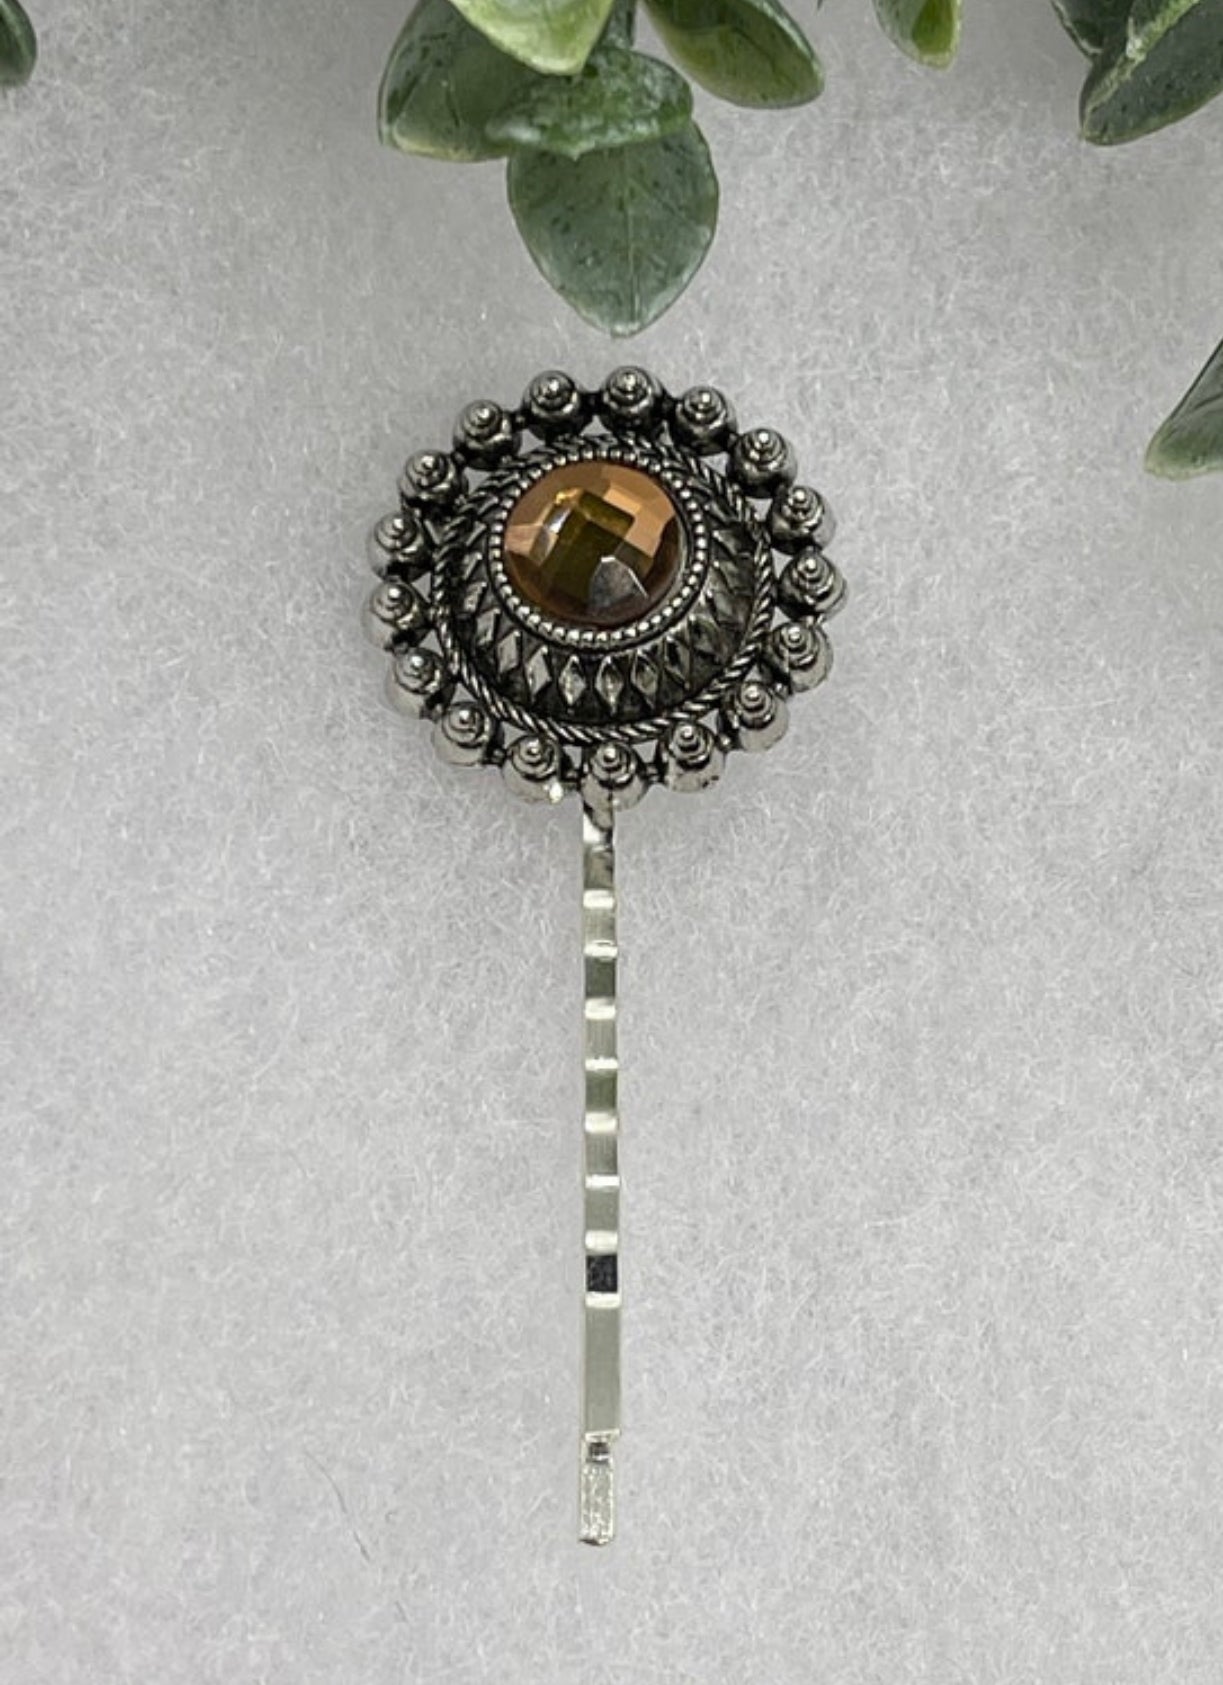 Brown Crystal Rhinestone silver tone vintage Style 2..5” Long hair accessory hair pin bridal wedding formal princess hair accessory accessoriesThe Hairdazzzel Accessory brings out the beauty and style within.